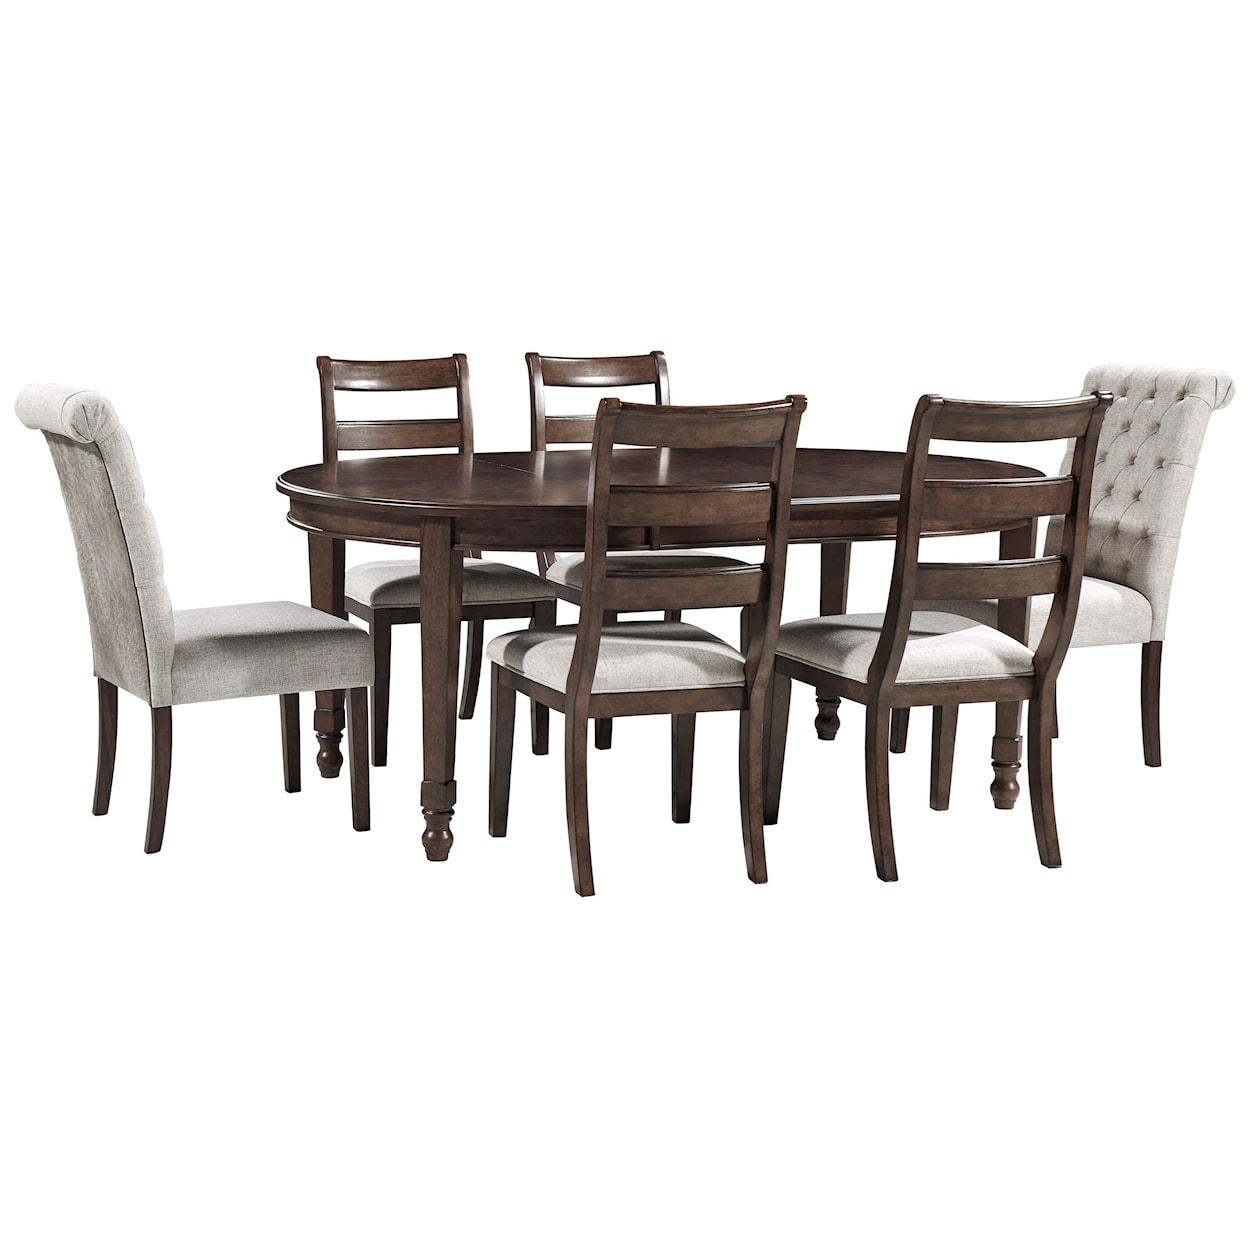 Signature Design by Ashley Adinton 7-Piece Table and Chair Set